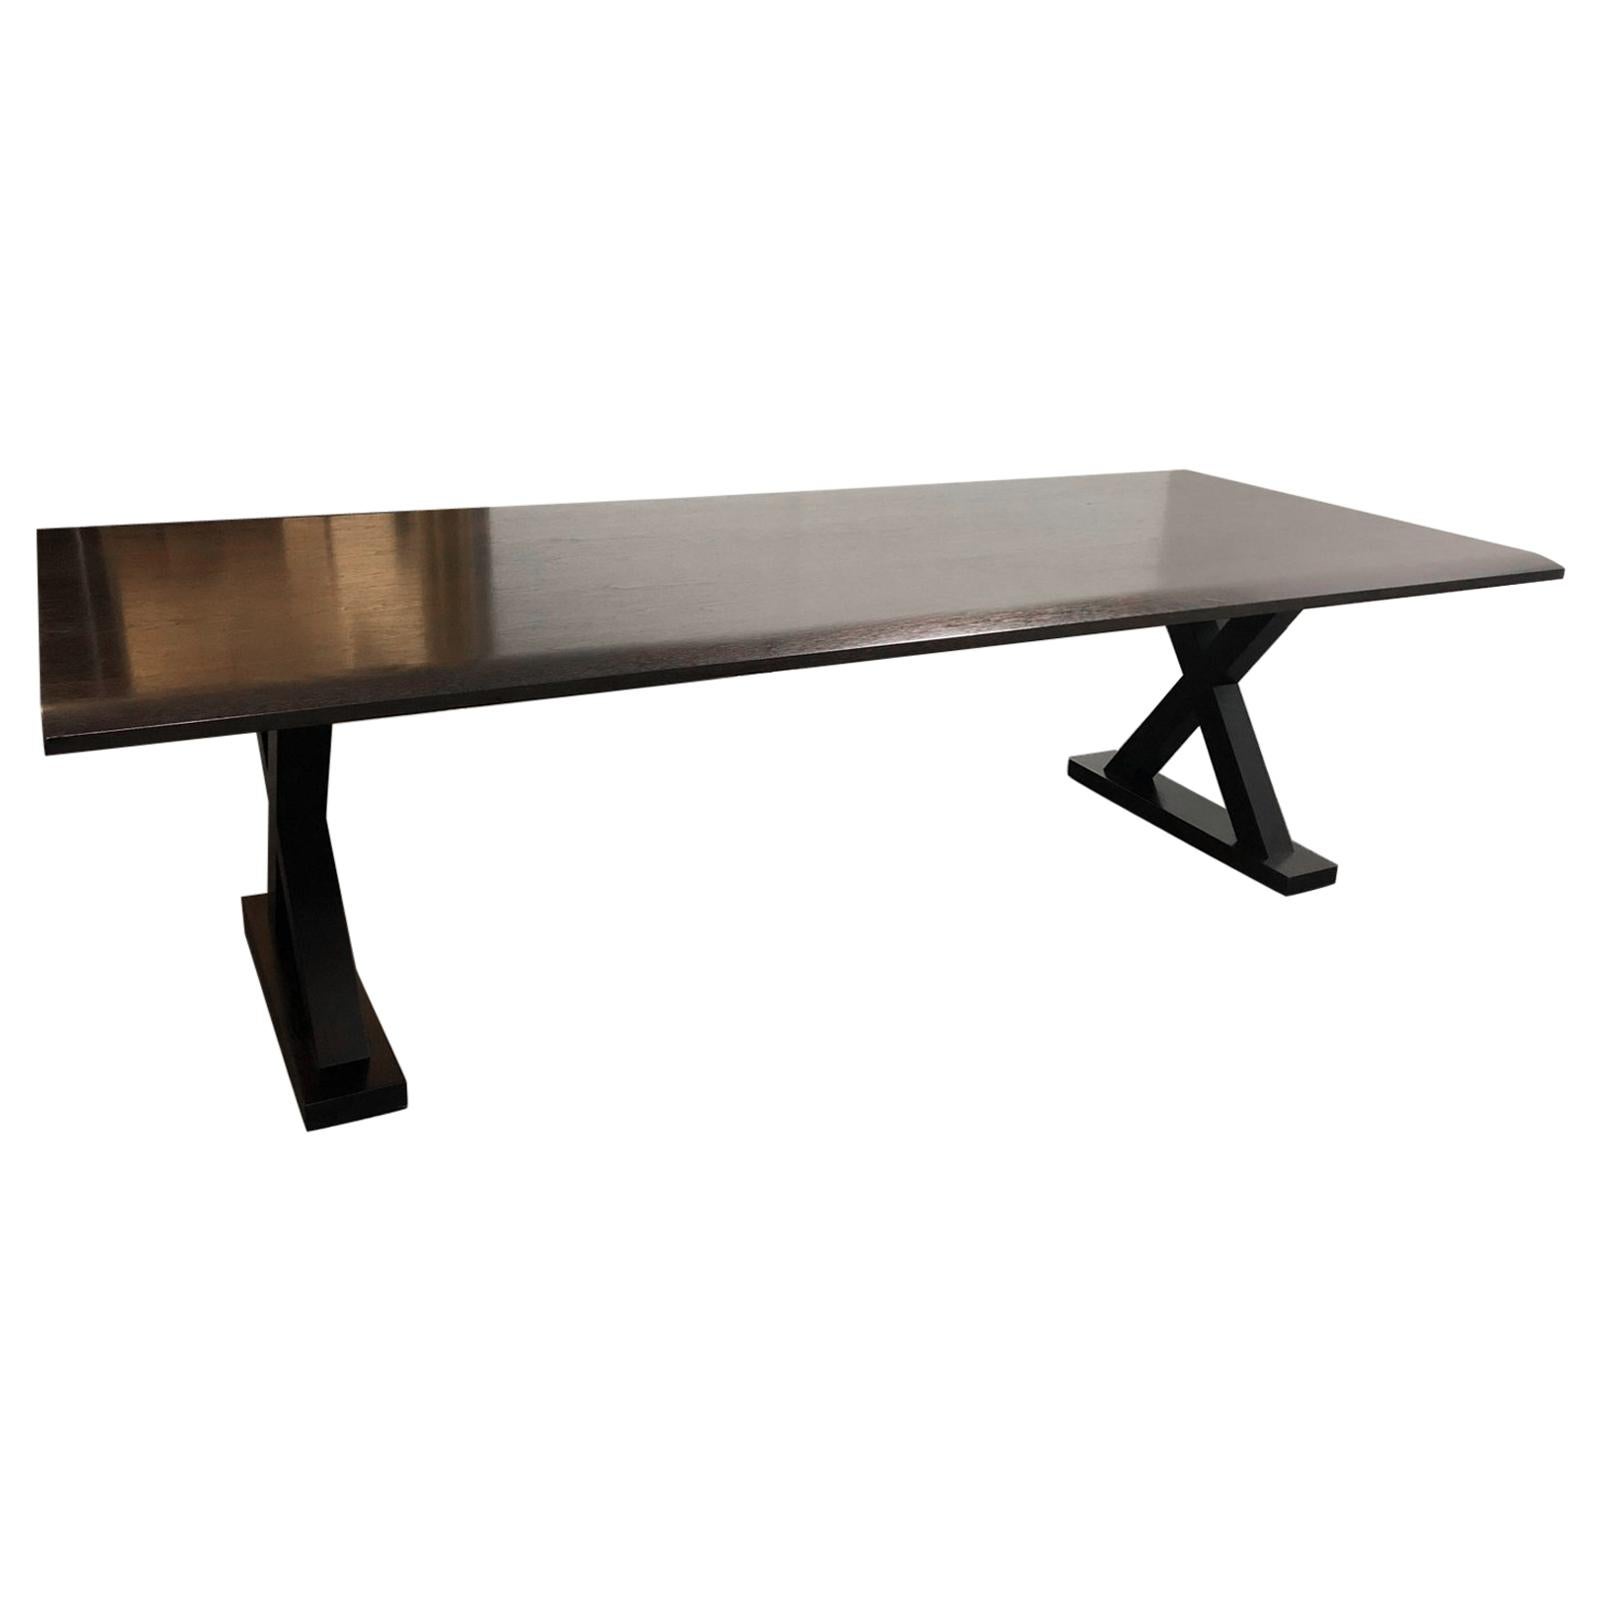 Christian Liaigre Custom-Sized 'Courrier' Table for Holly Hunt